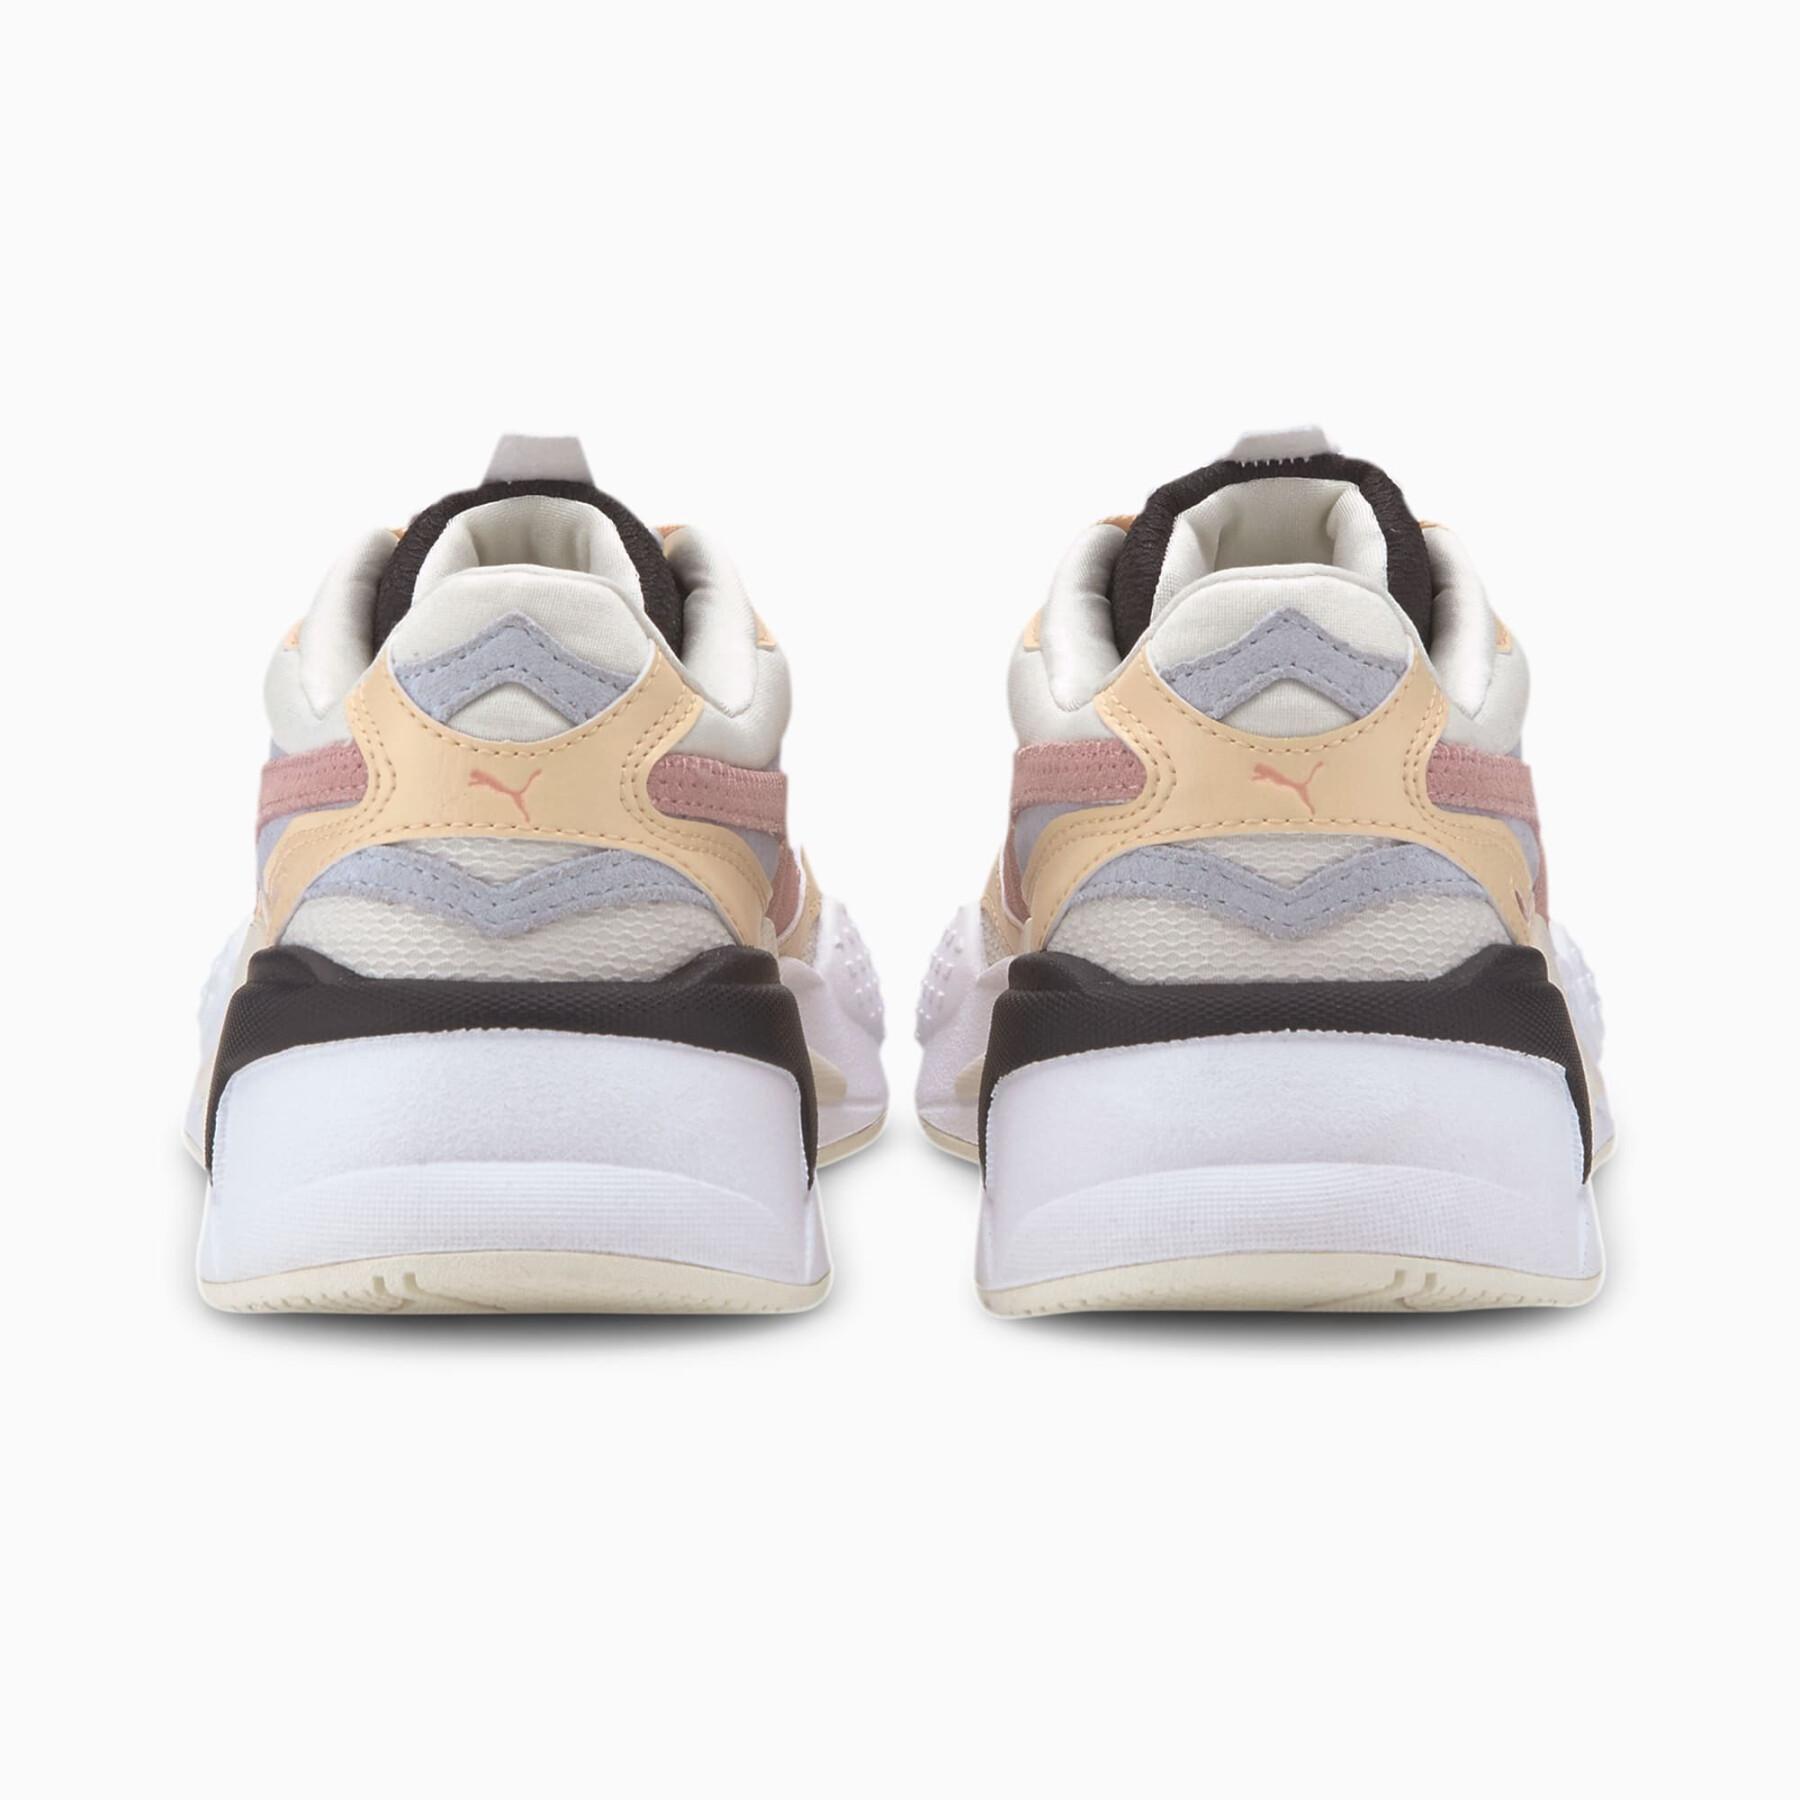 Women's shoes Puma RS-X³ Layers